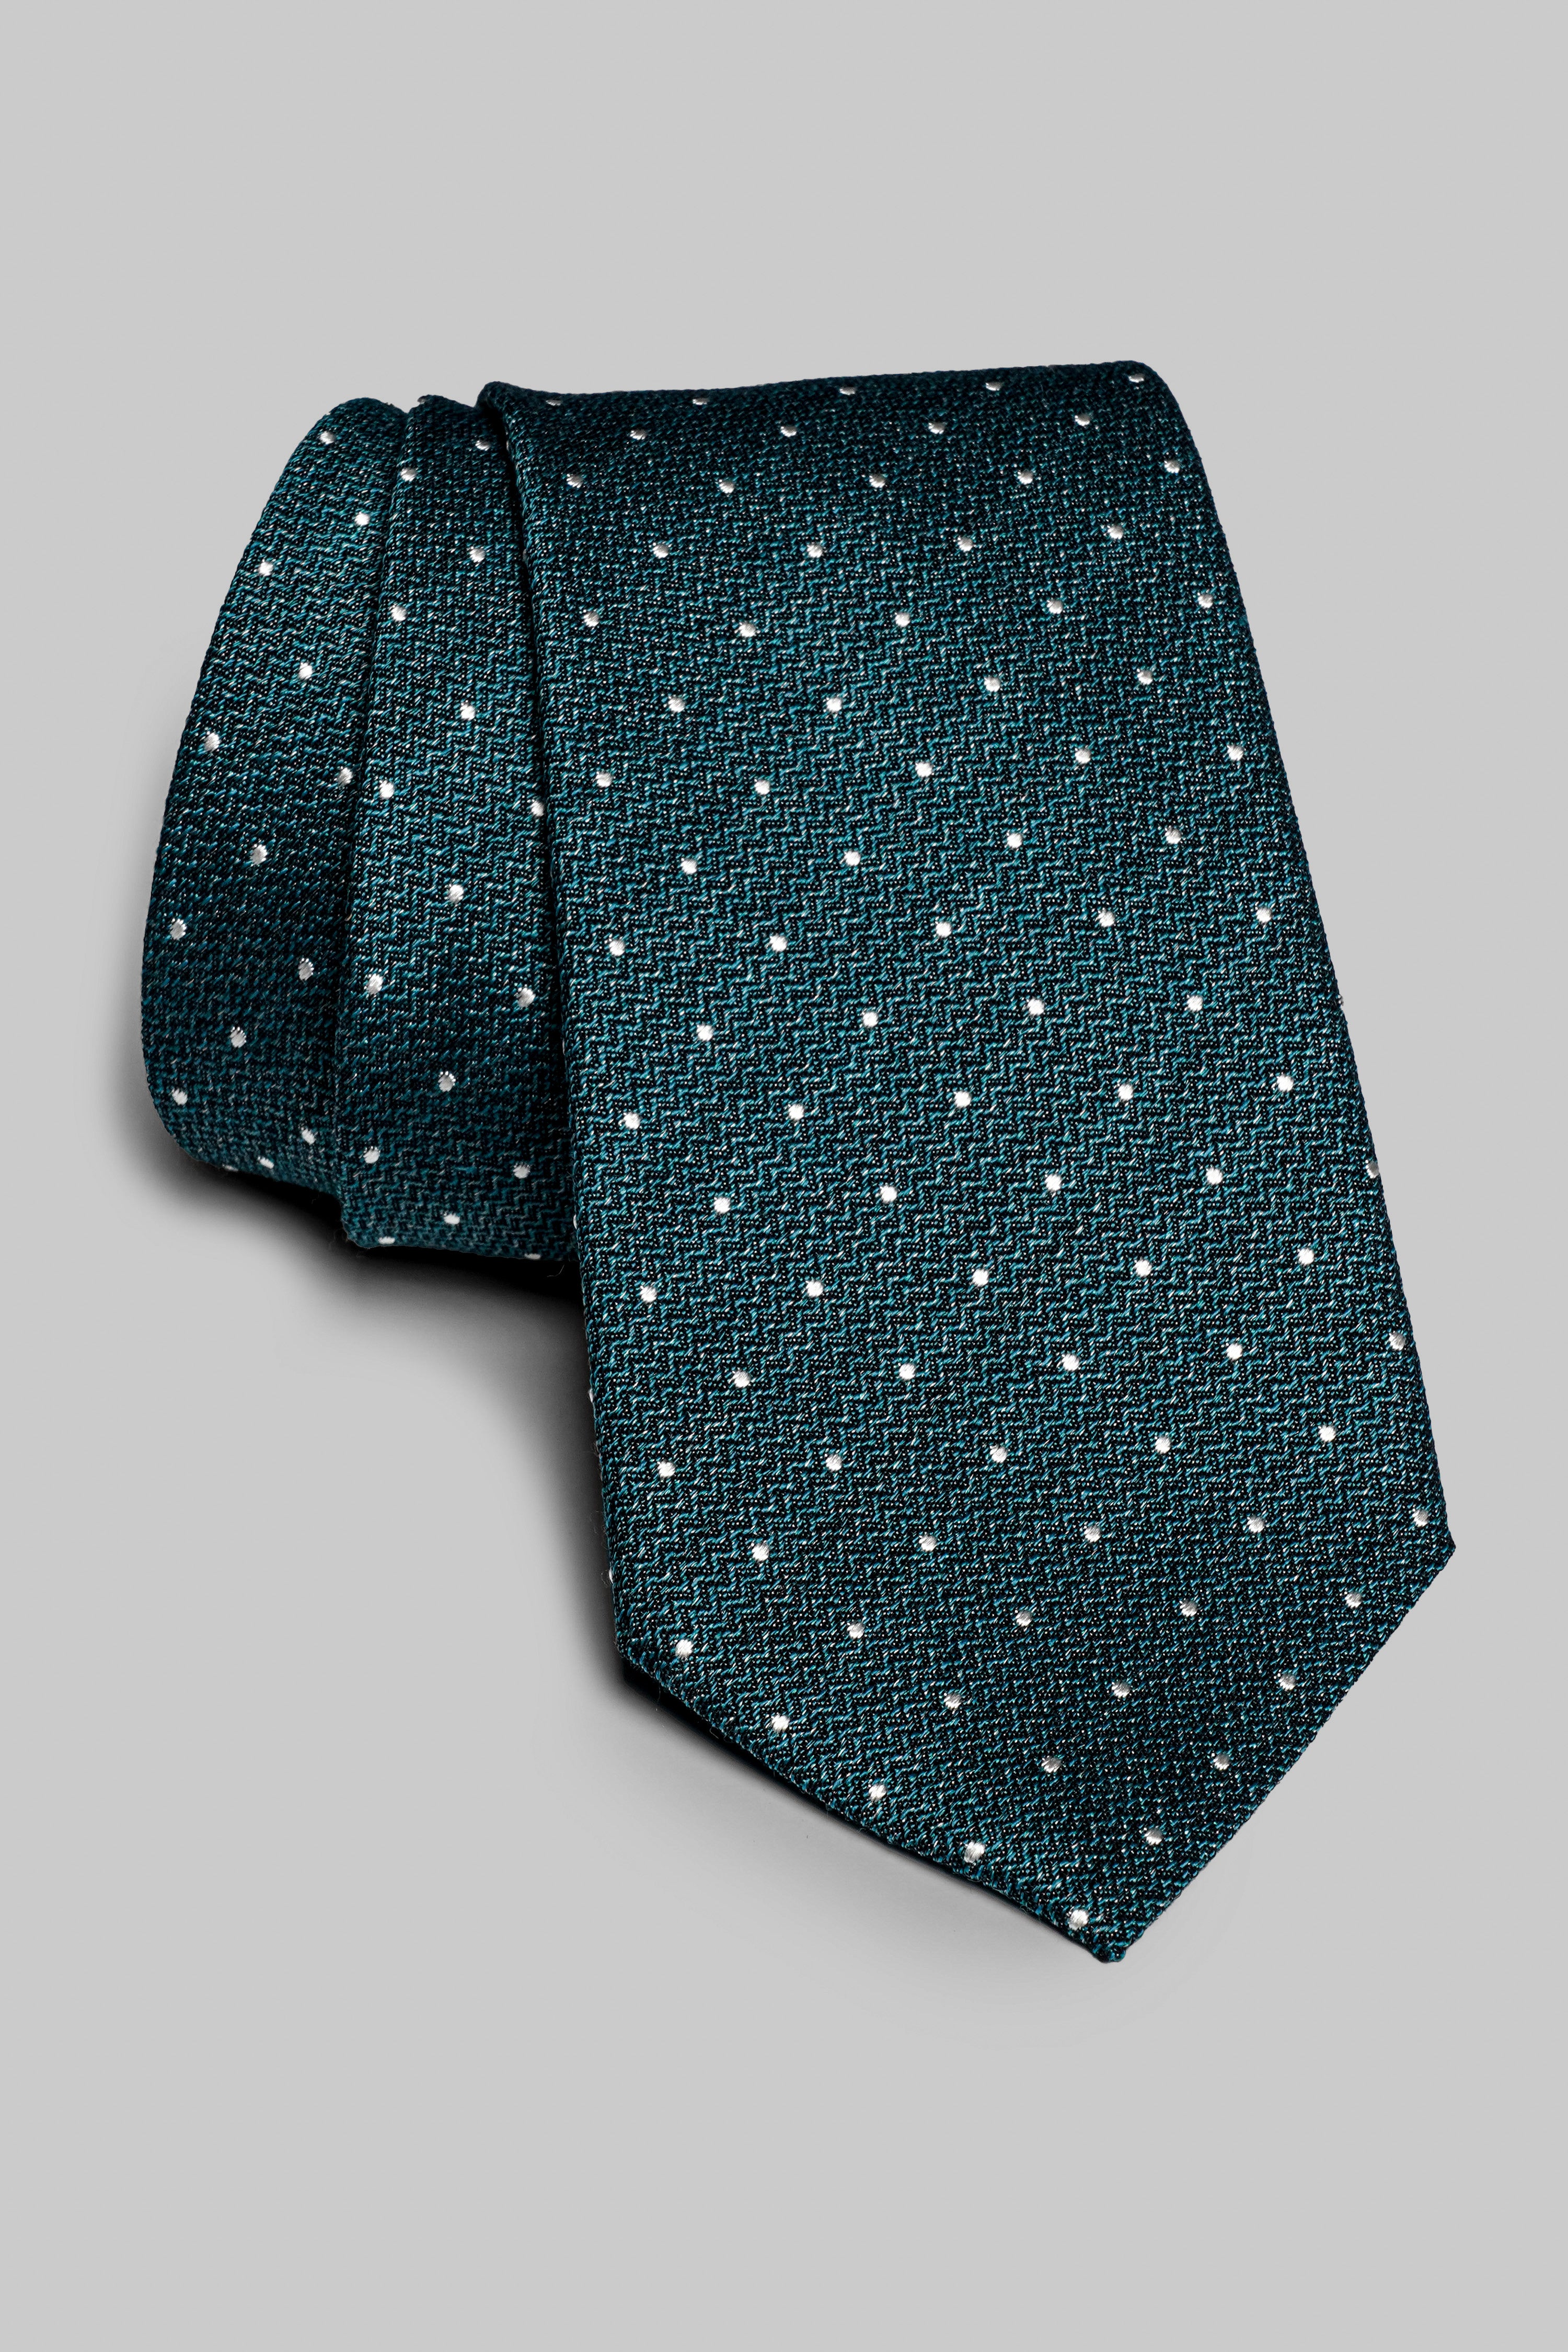 Alt view 1 Pindot Woven Tie in Teal